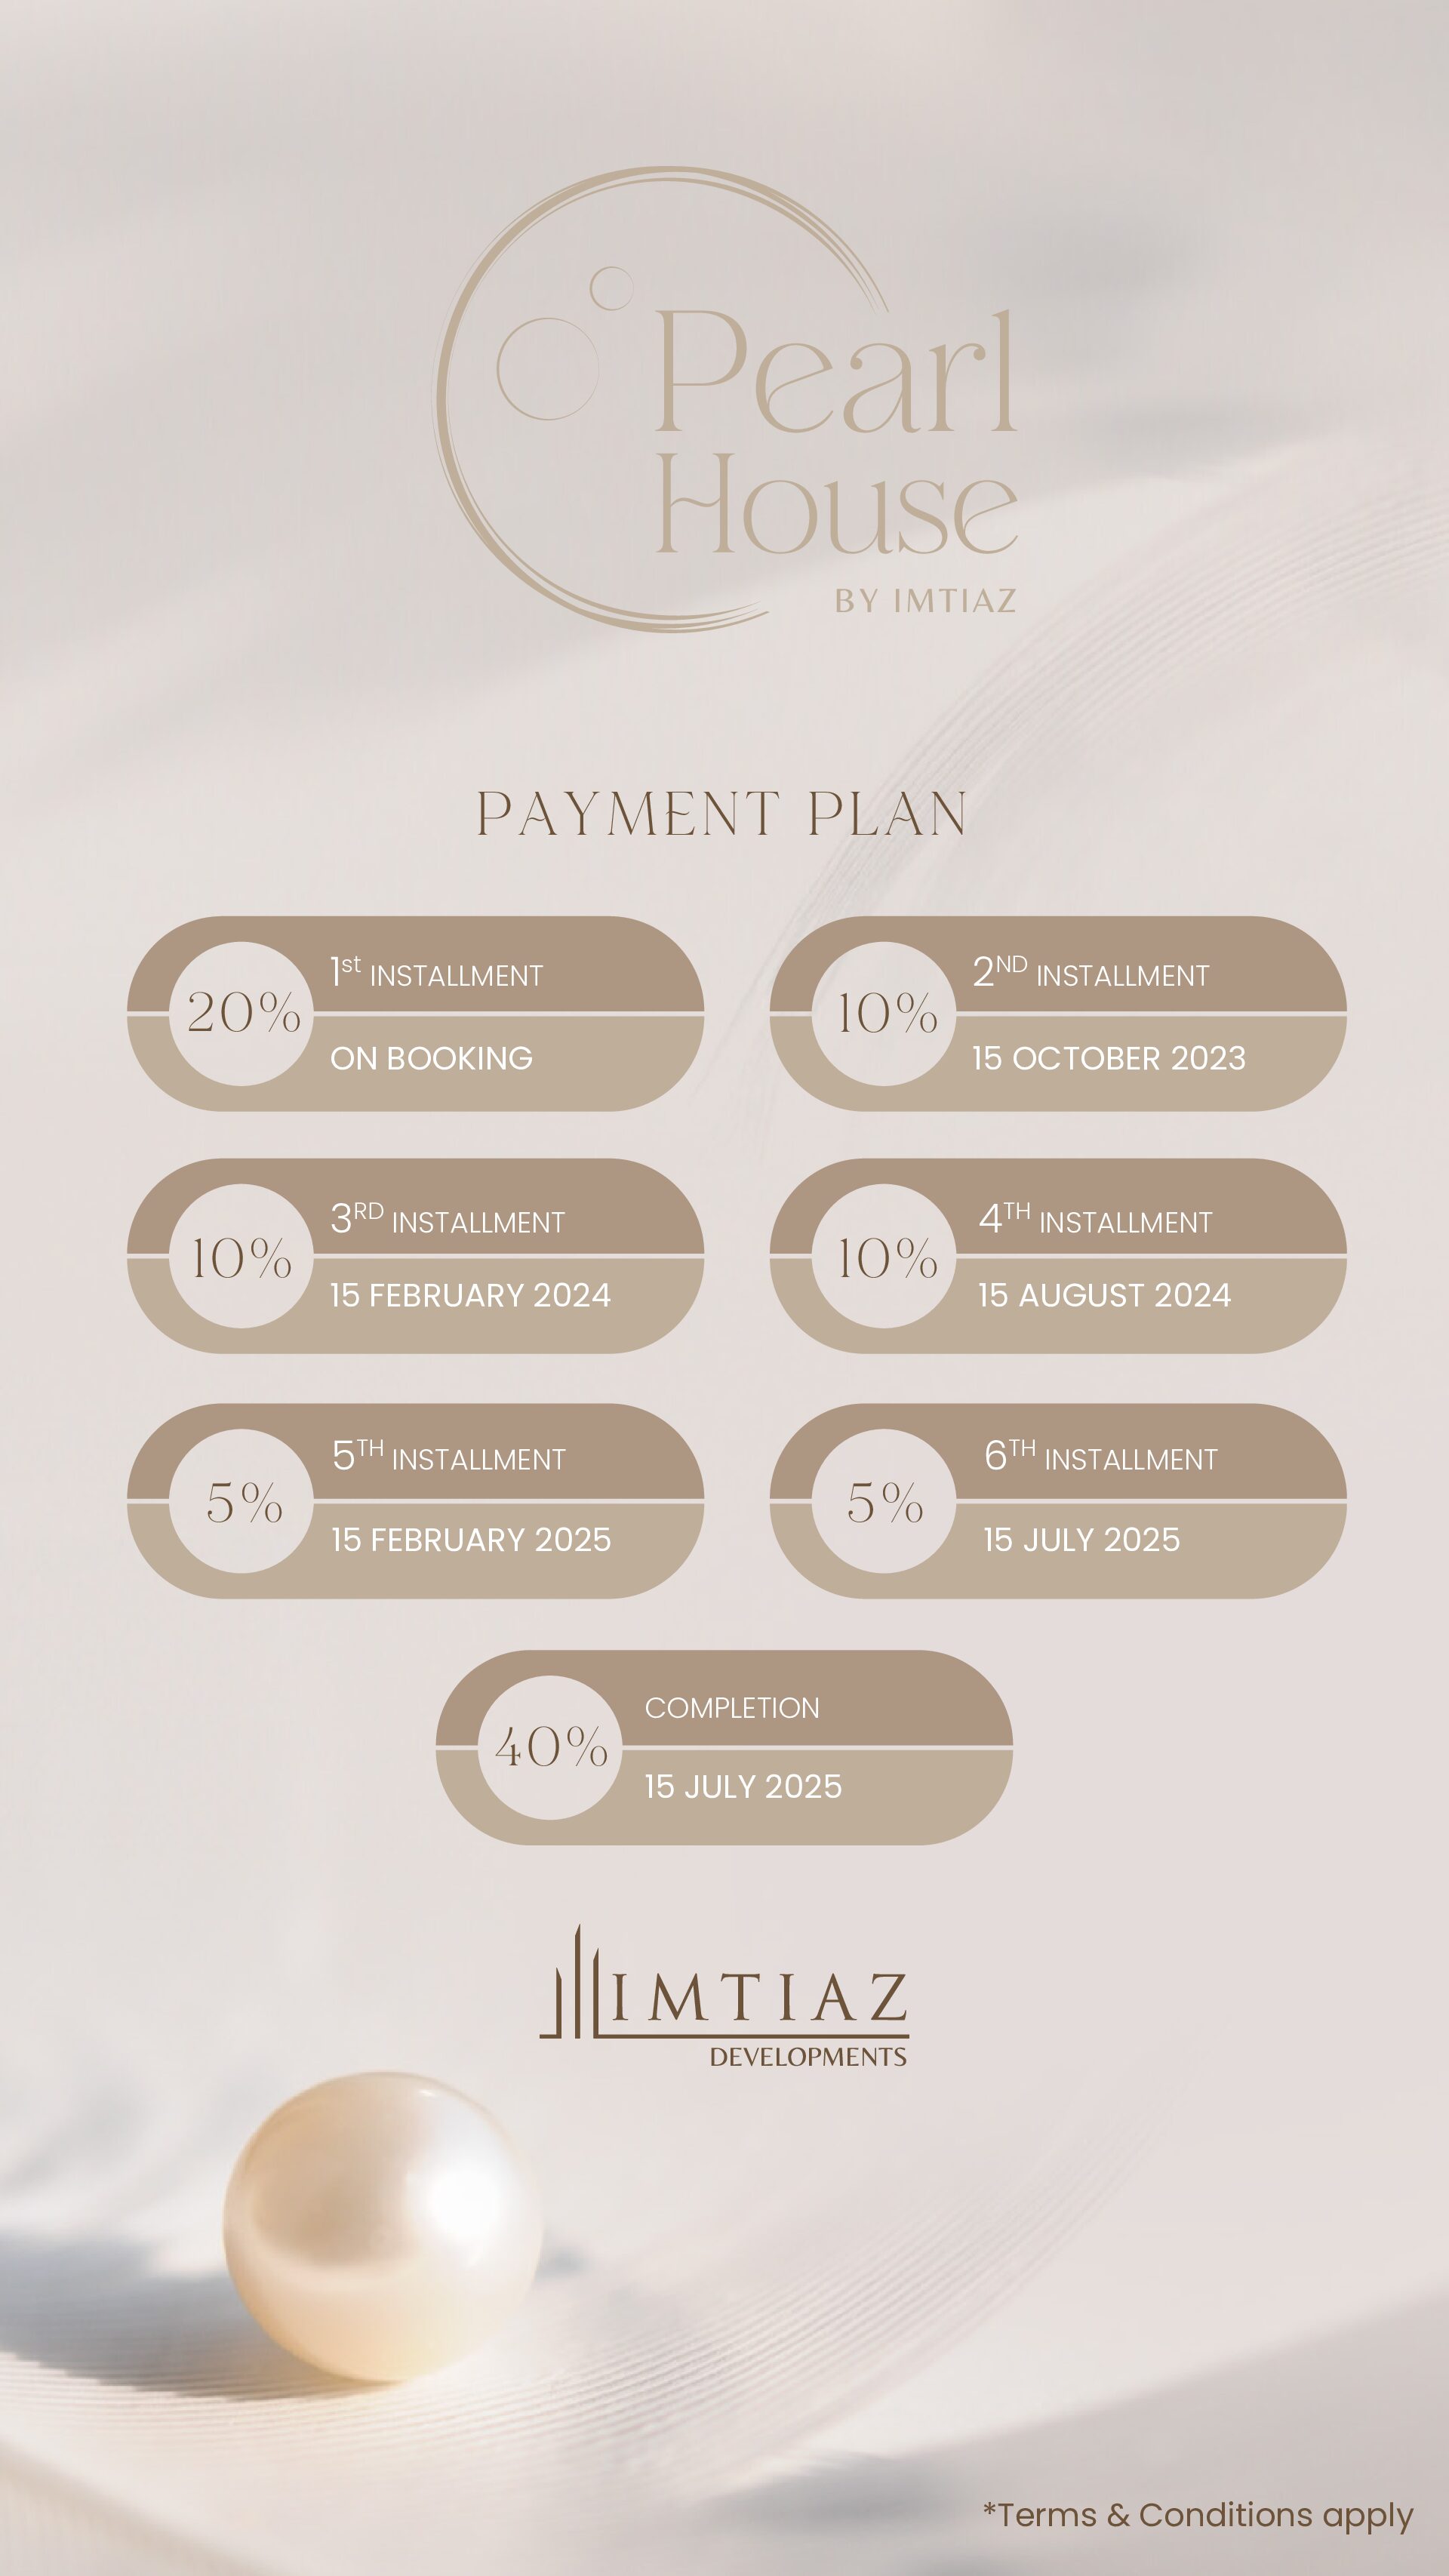 IMTIAZ-PEARL-HOUSE-PAYMENT-PLAN-TRUSS